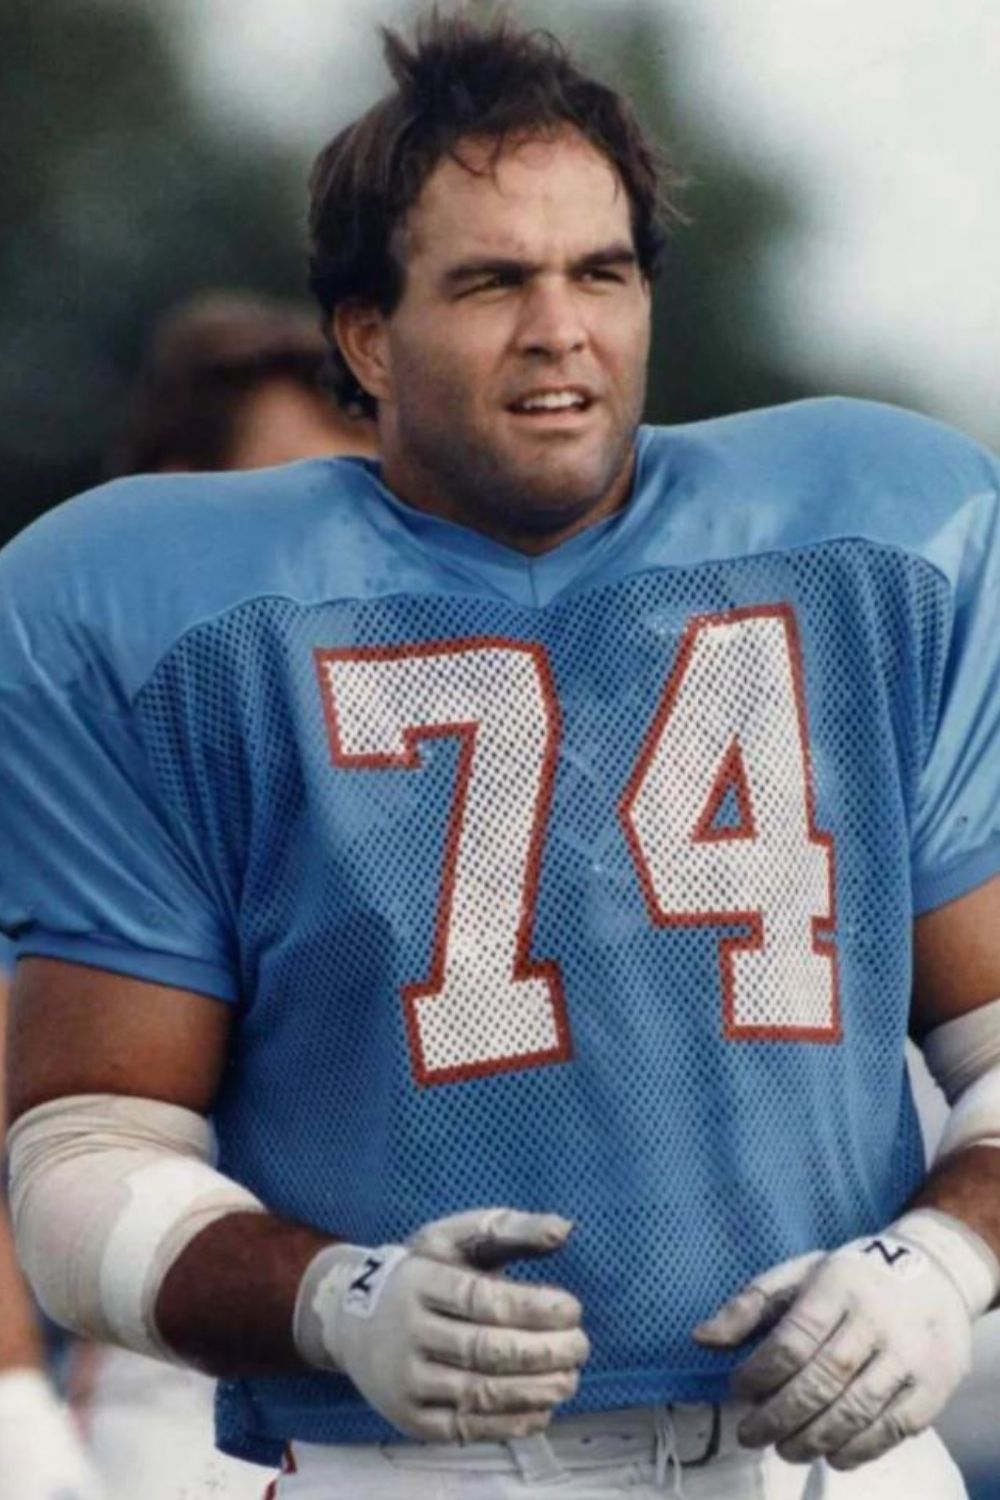 Bruce Matthews, A Retired NFL Player Turned Coach